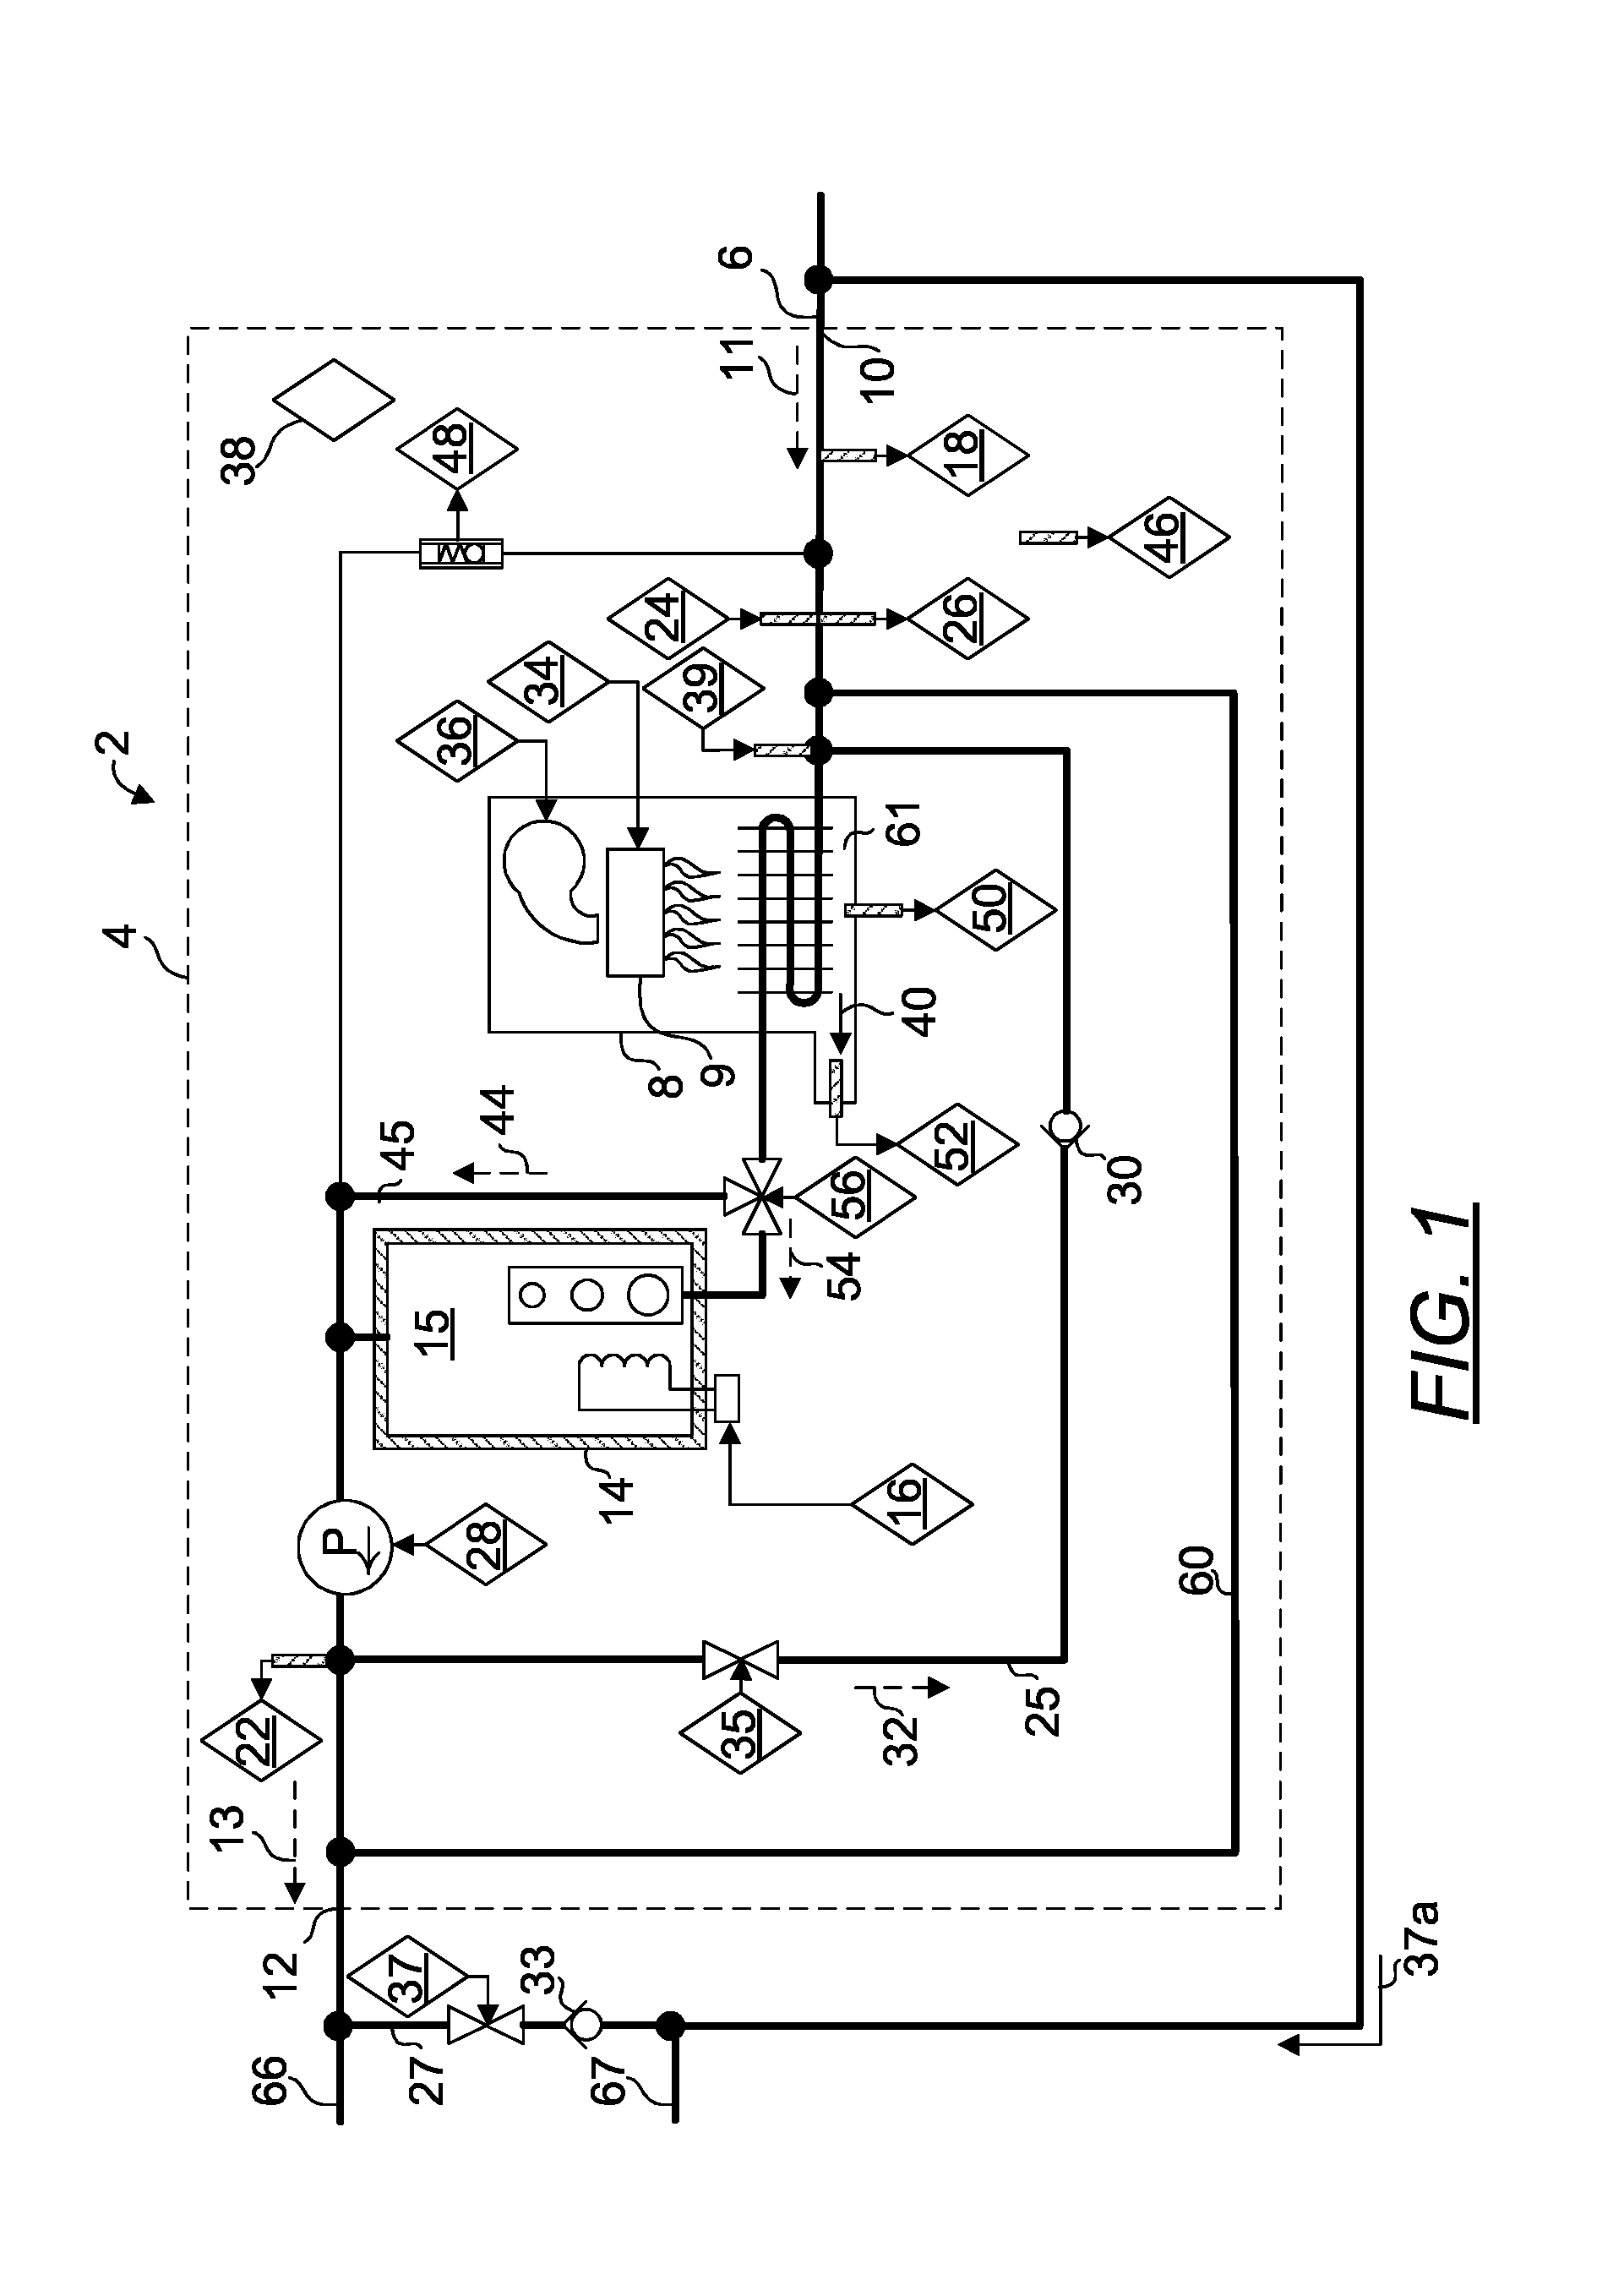 Apparatus and control method for a hybrid tankless water heater